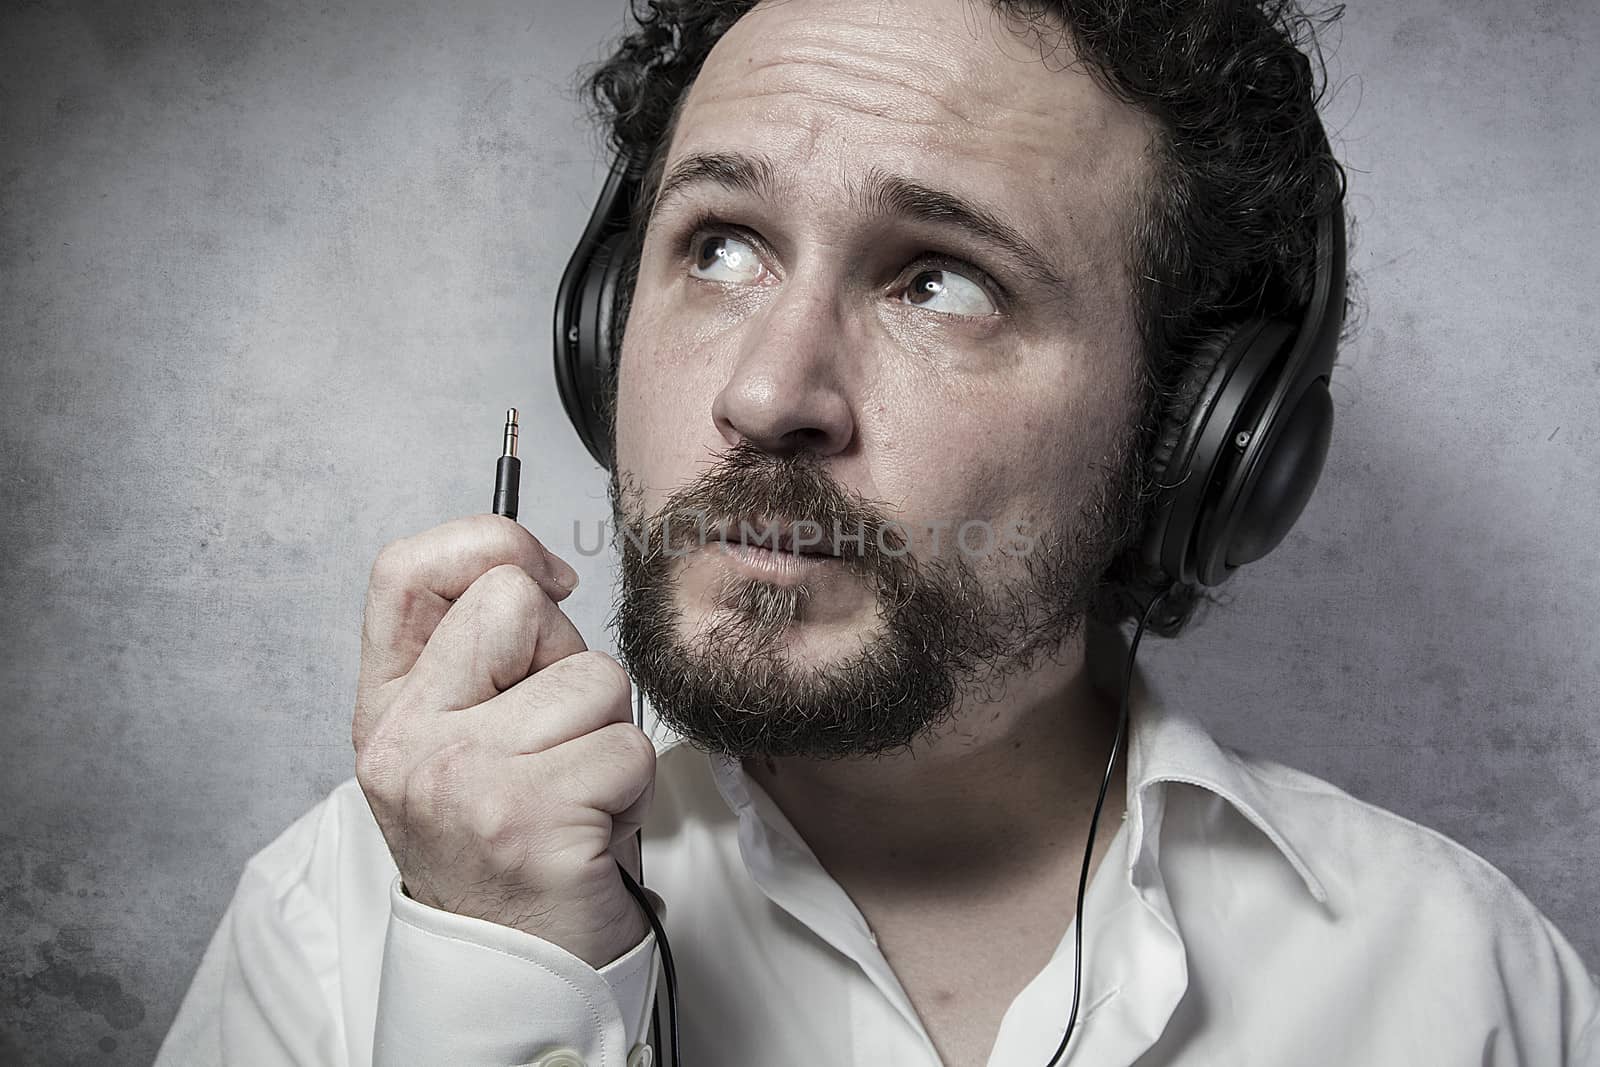 Jack, listening and enjoying music with headphones, man in white by FernandoCortes